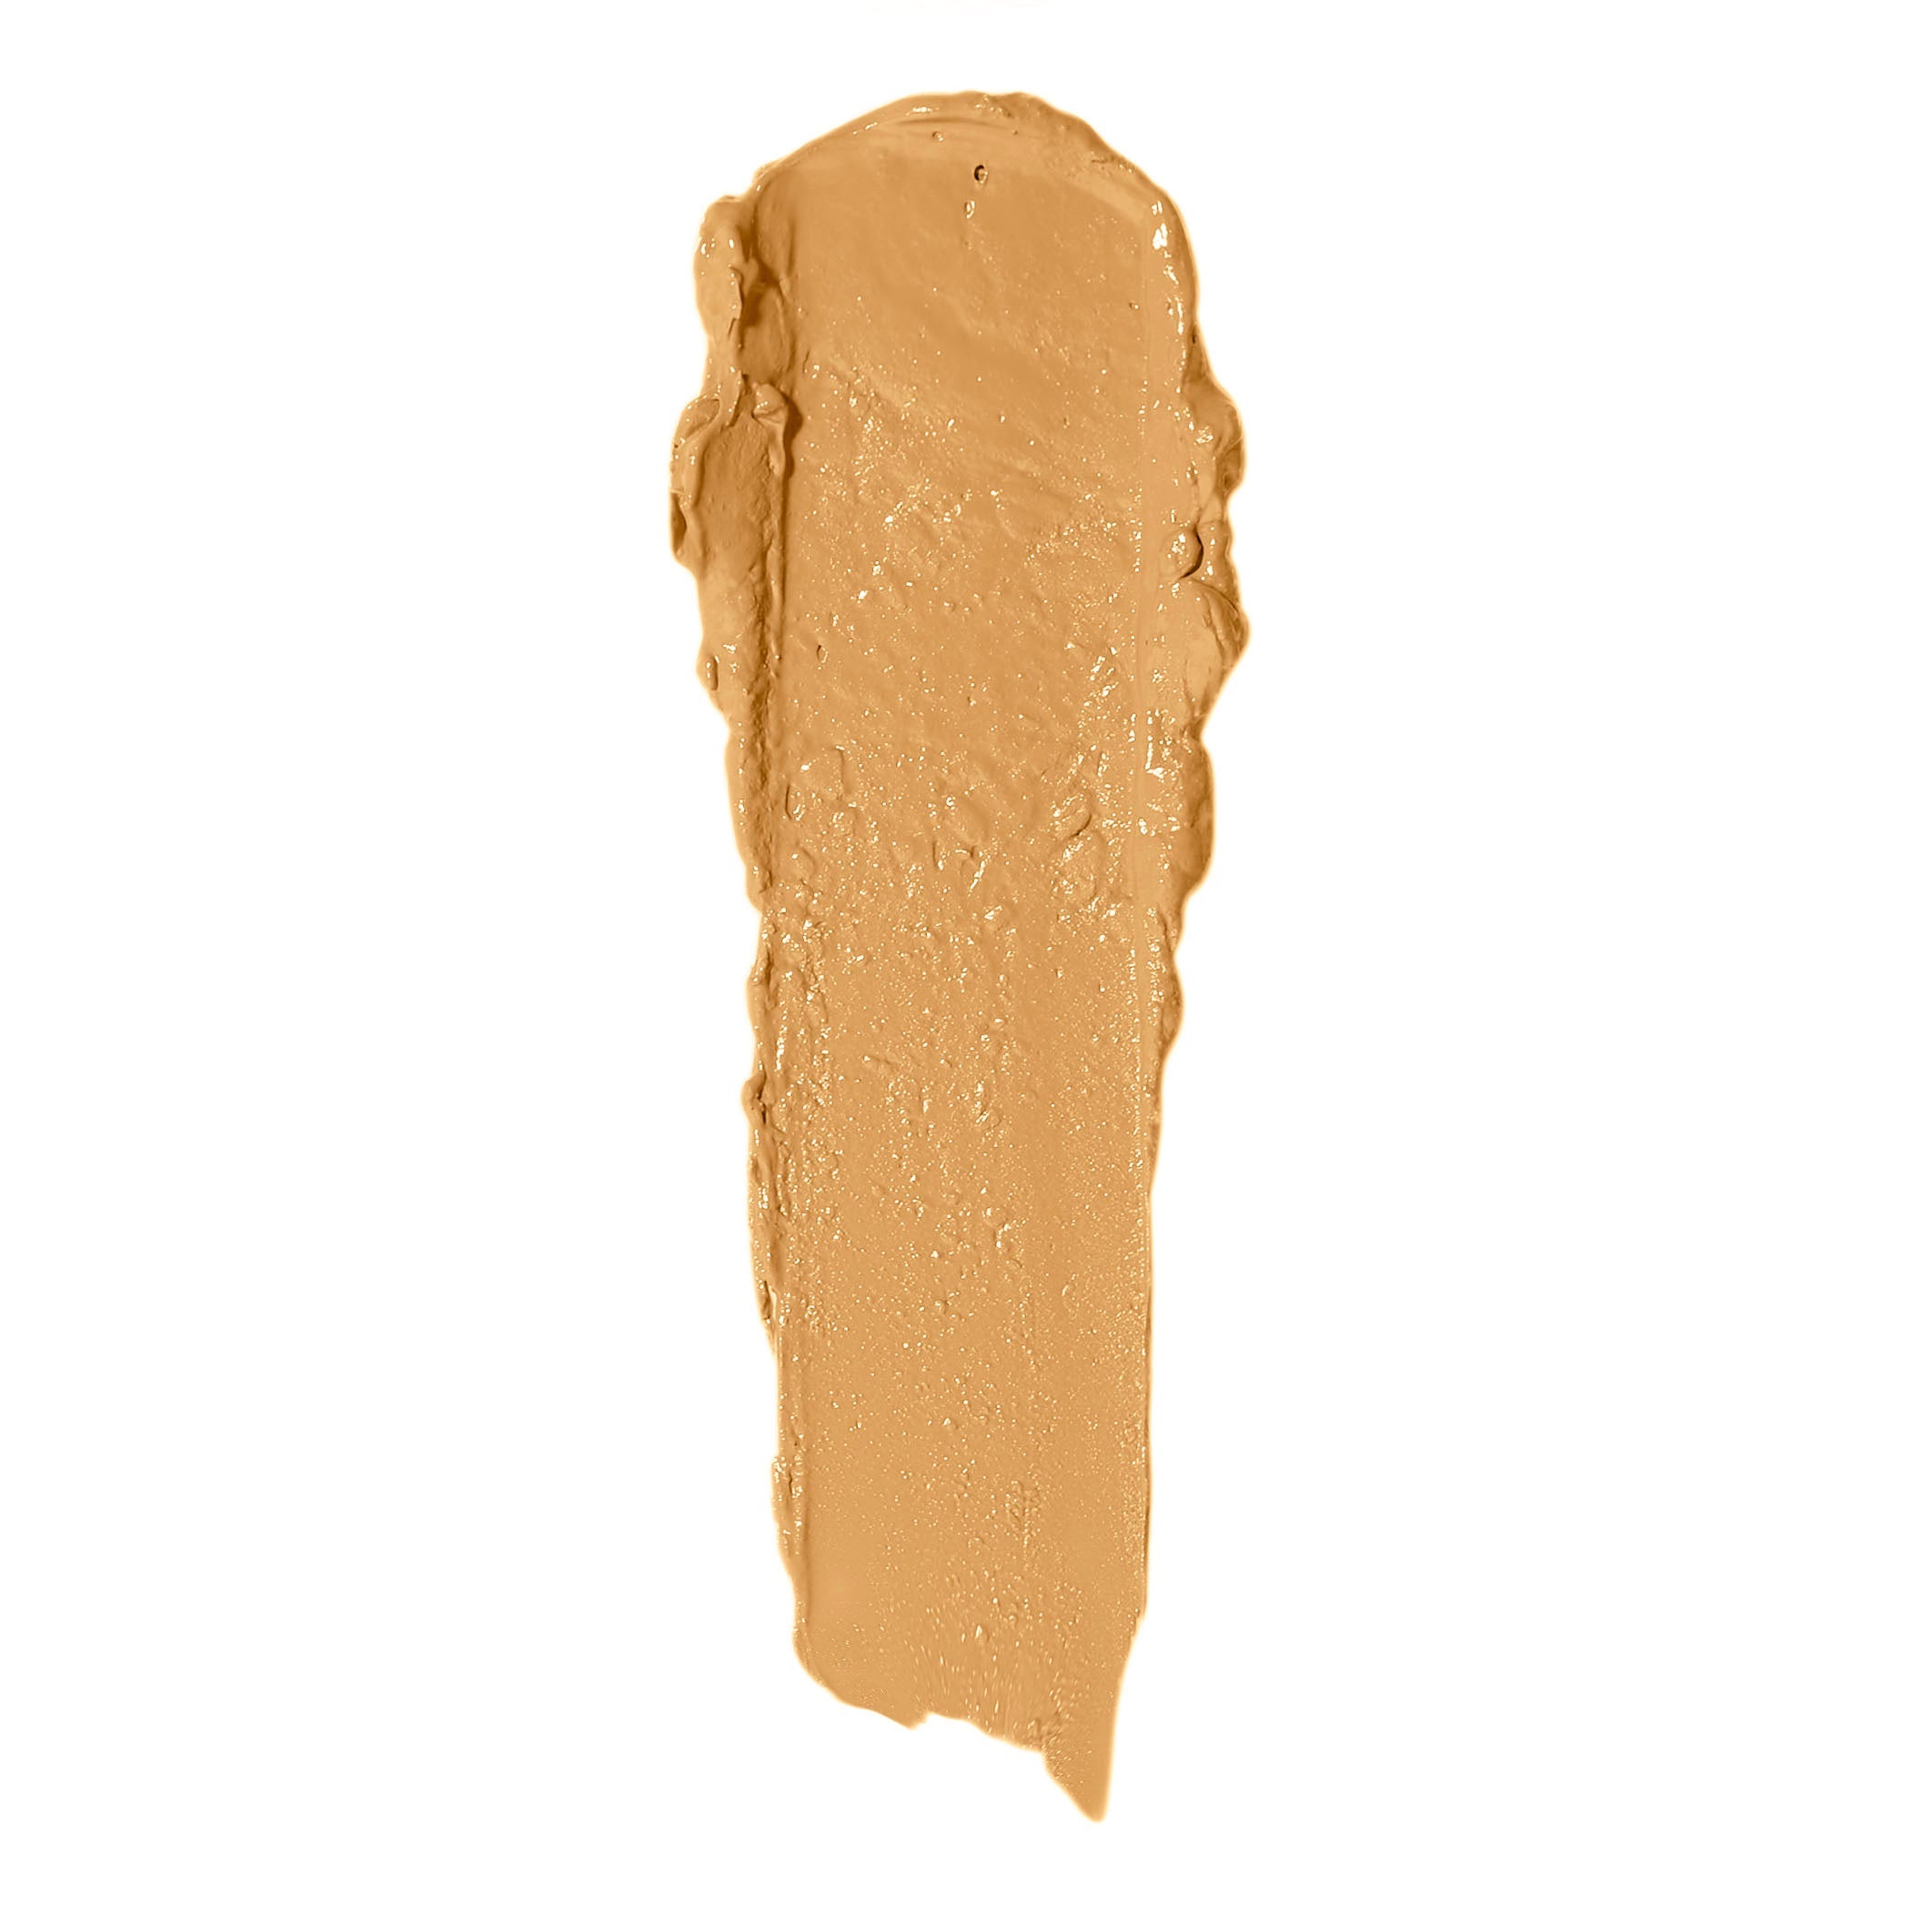 Blunder Cover an All-In-One Foundation/Concealer Shade - Vier.5 - 1